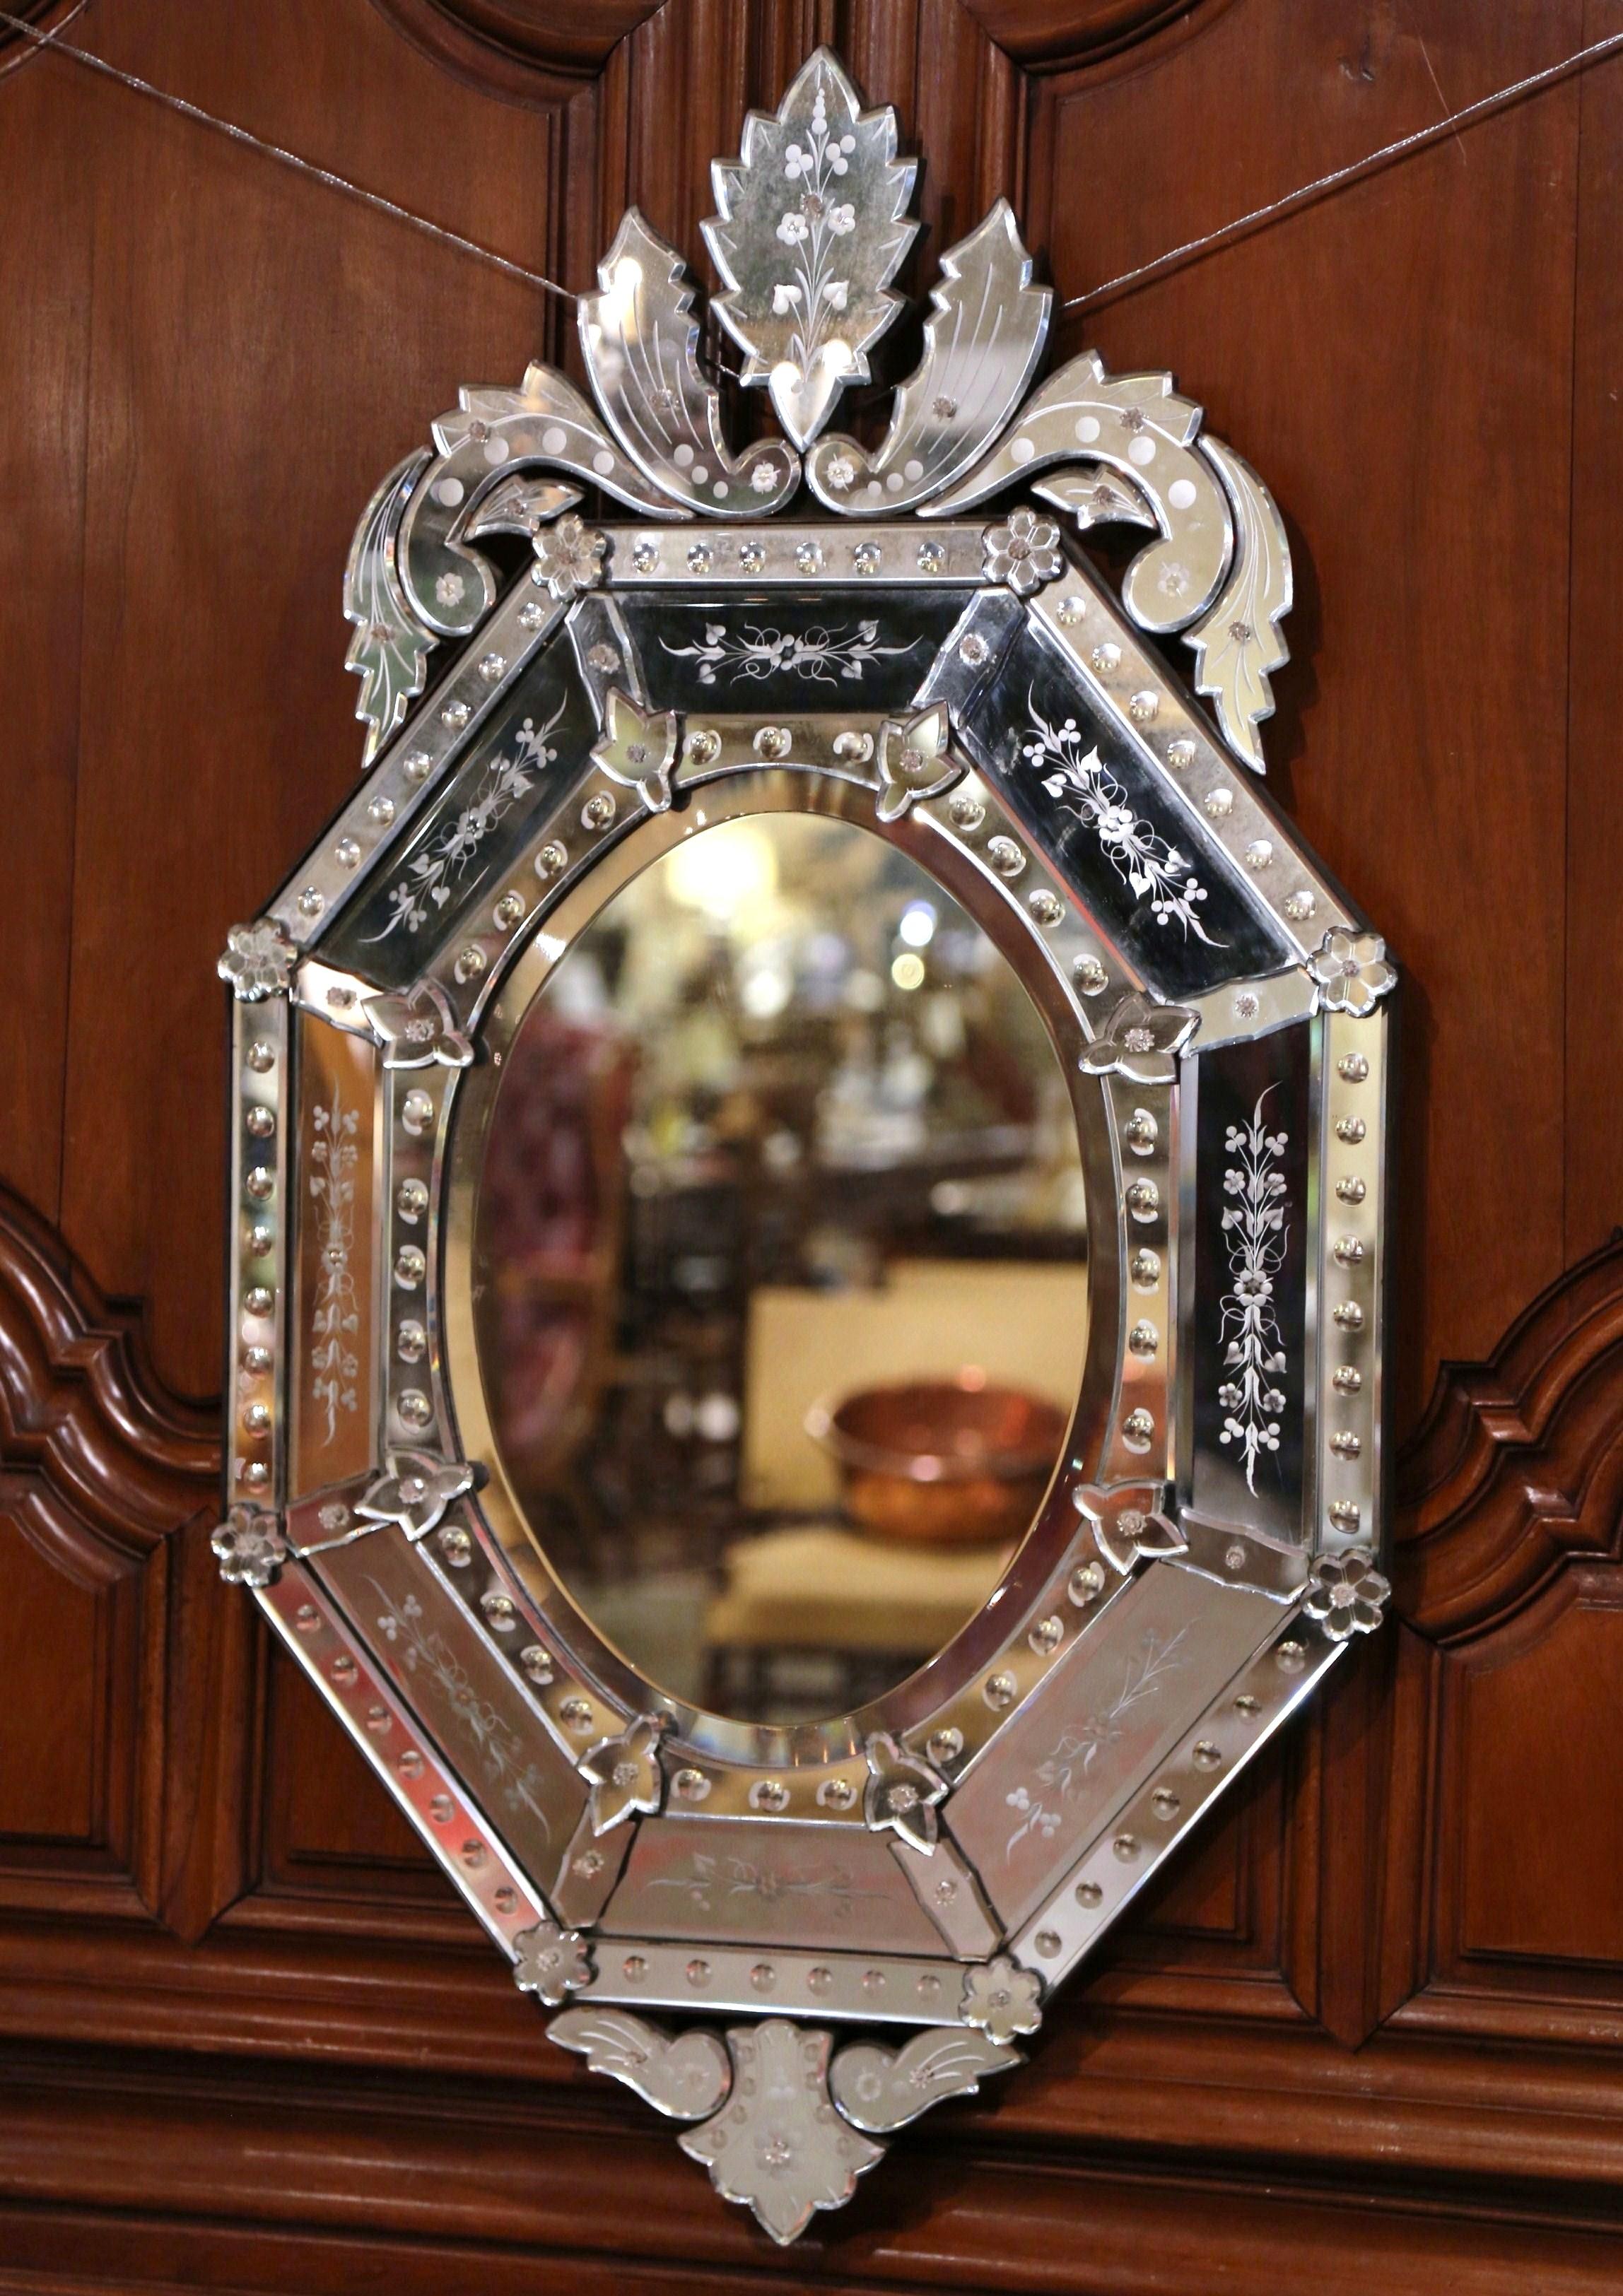 The overlay Venetian mirror was crafted in Italy, circa 1910, octagonal in shape, the wall piece features a large carved leaf motif at the pediment, flanked by foliage on both sides. Around the periphery, each small mirror with raised medallion is